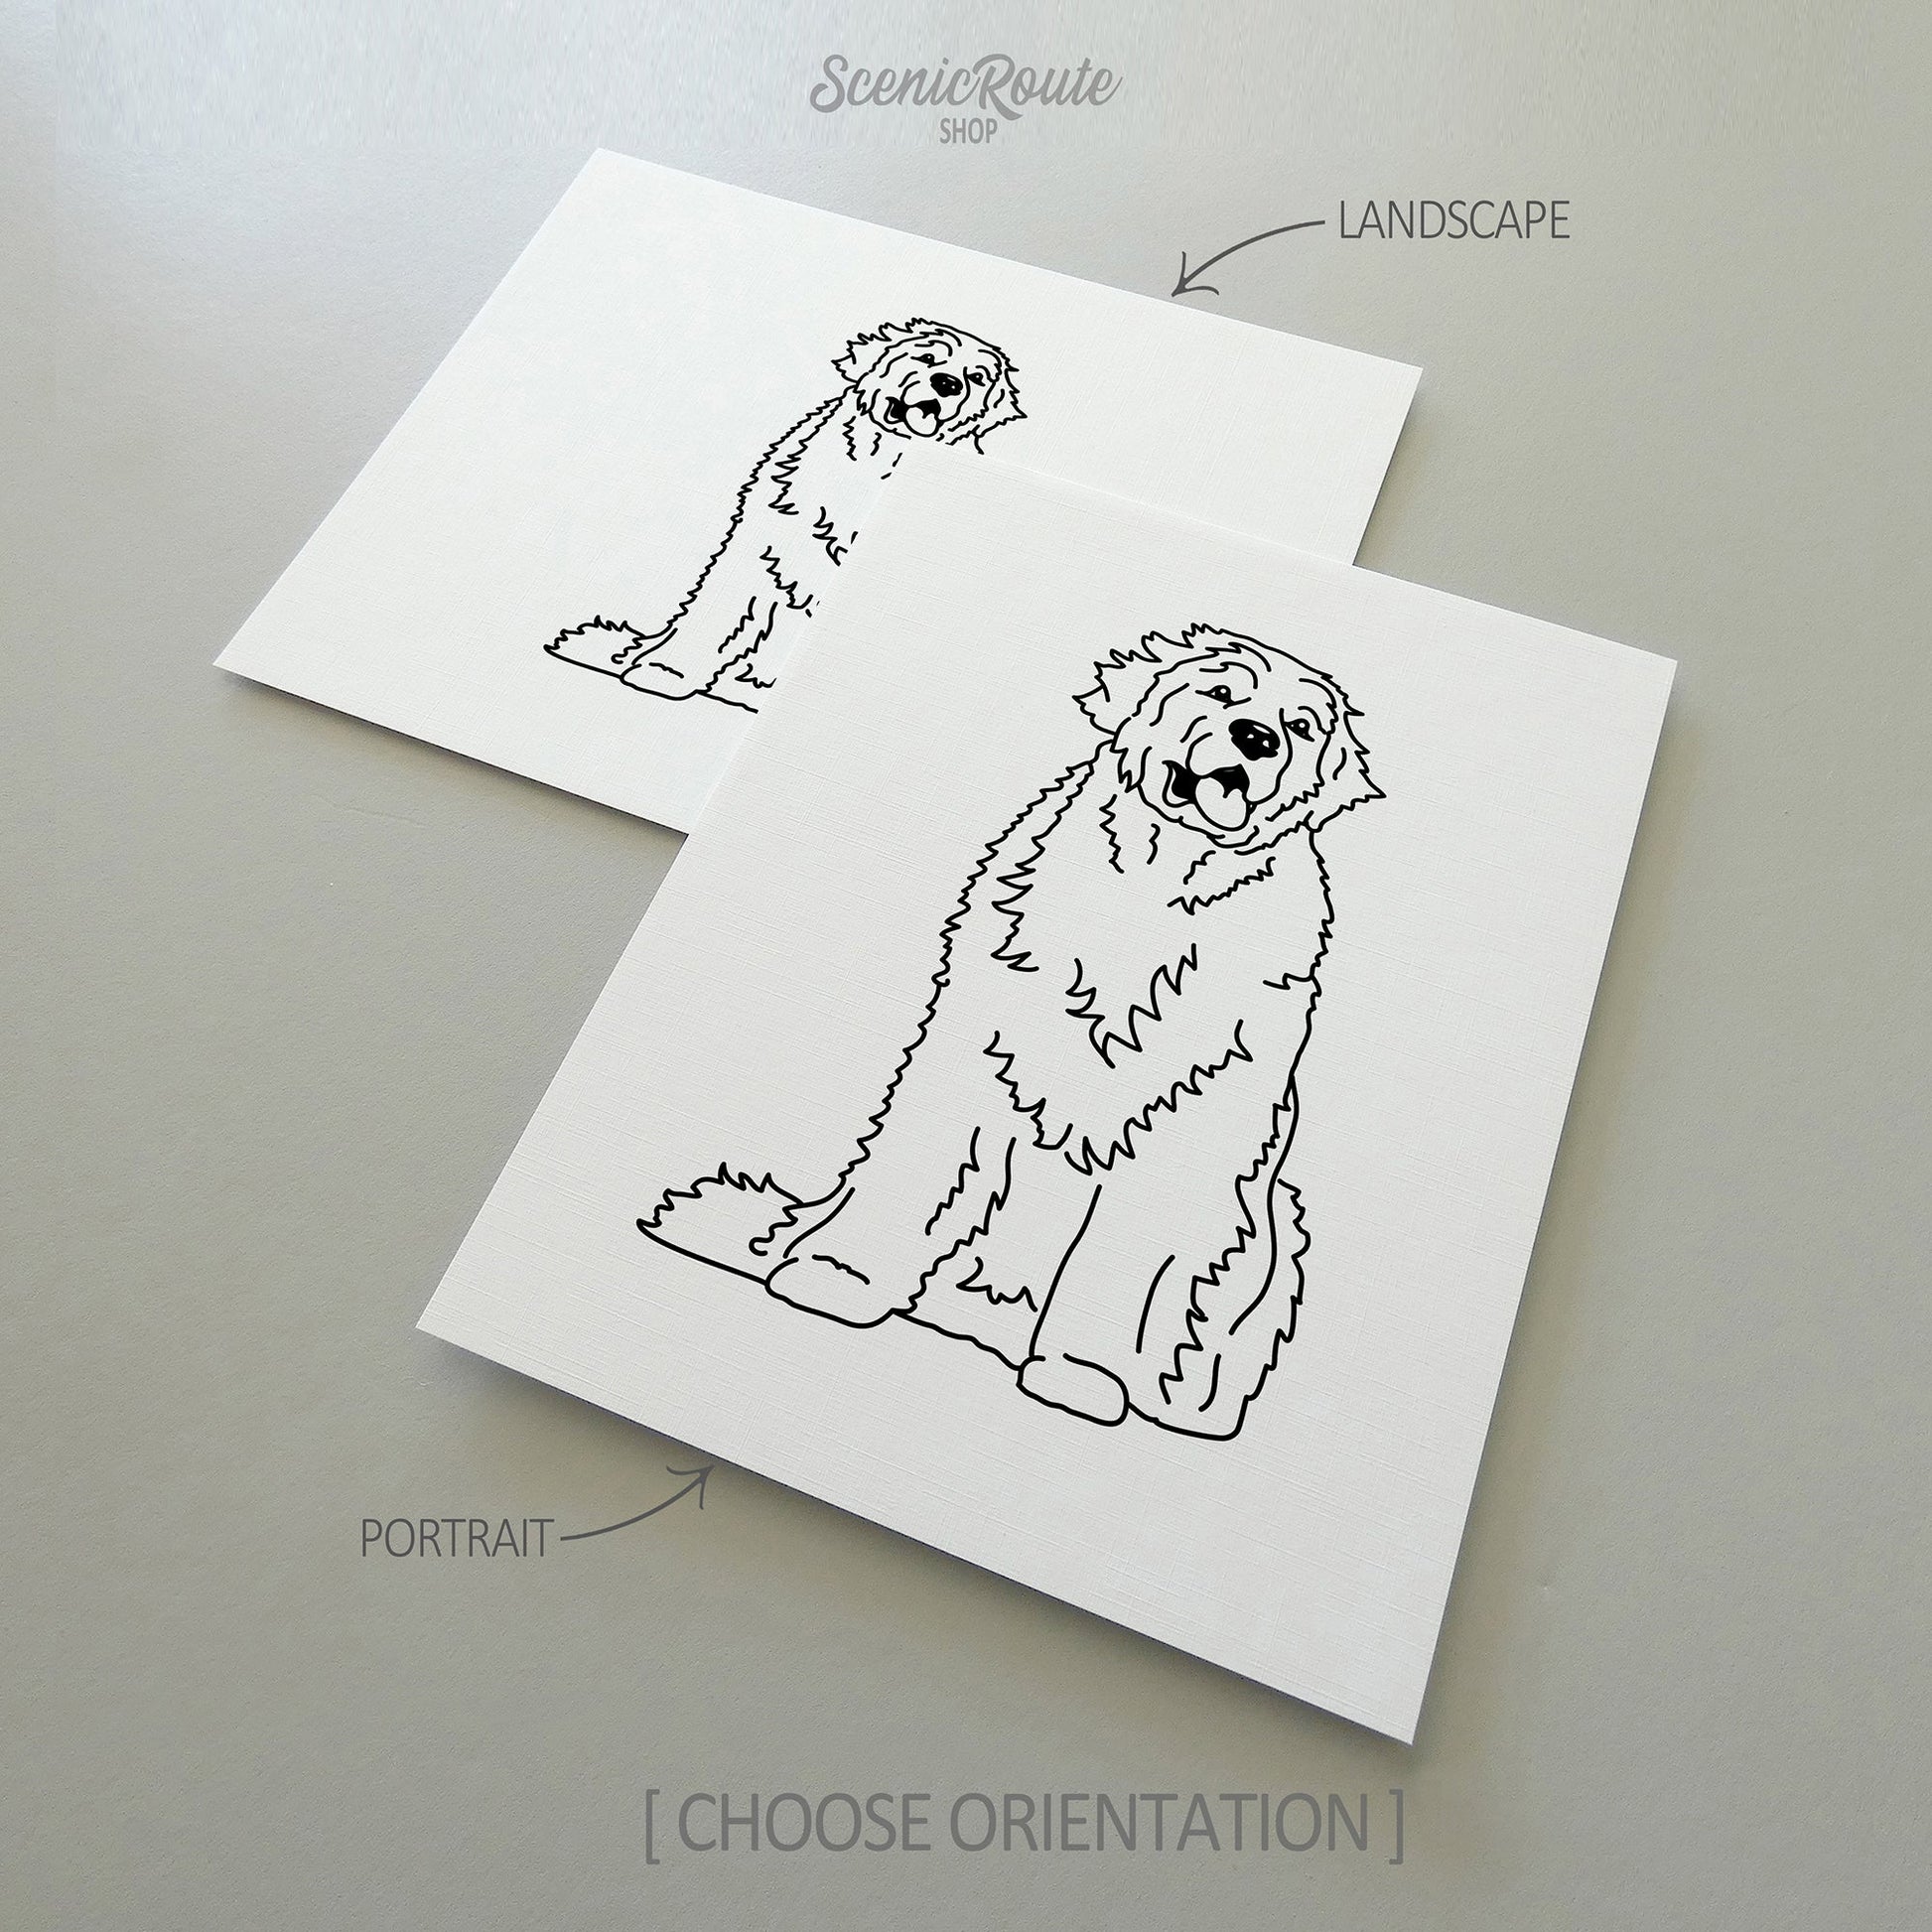 Two line art drawings of a Newfoundland dog on white linen paper with a gray background.  The pieces are shown in portrait and landscape orientation for the available art print options.